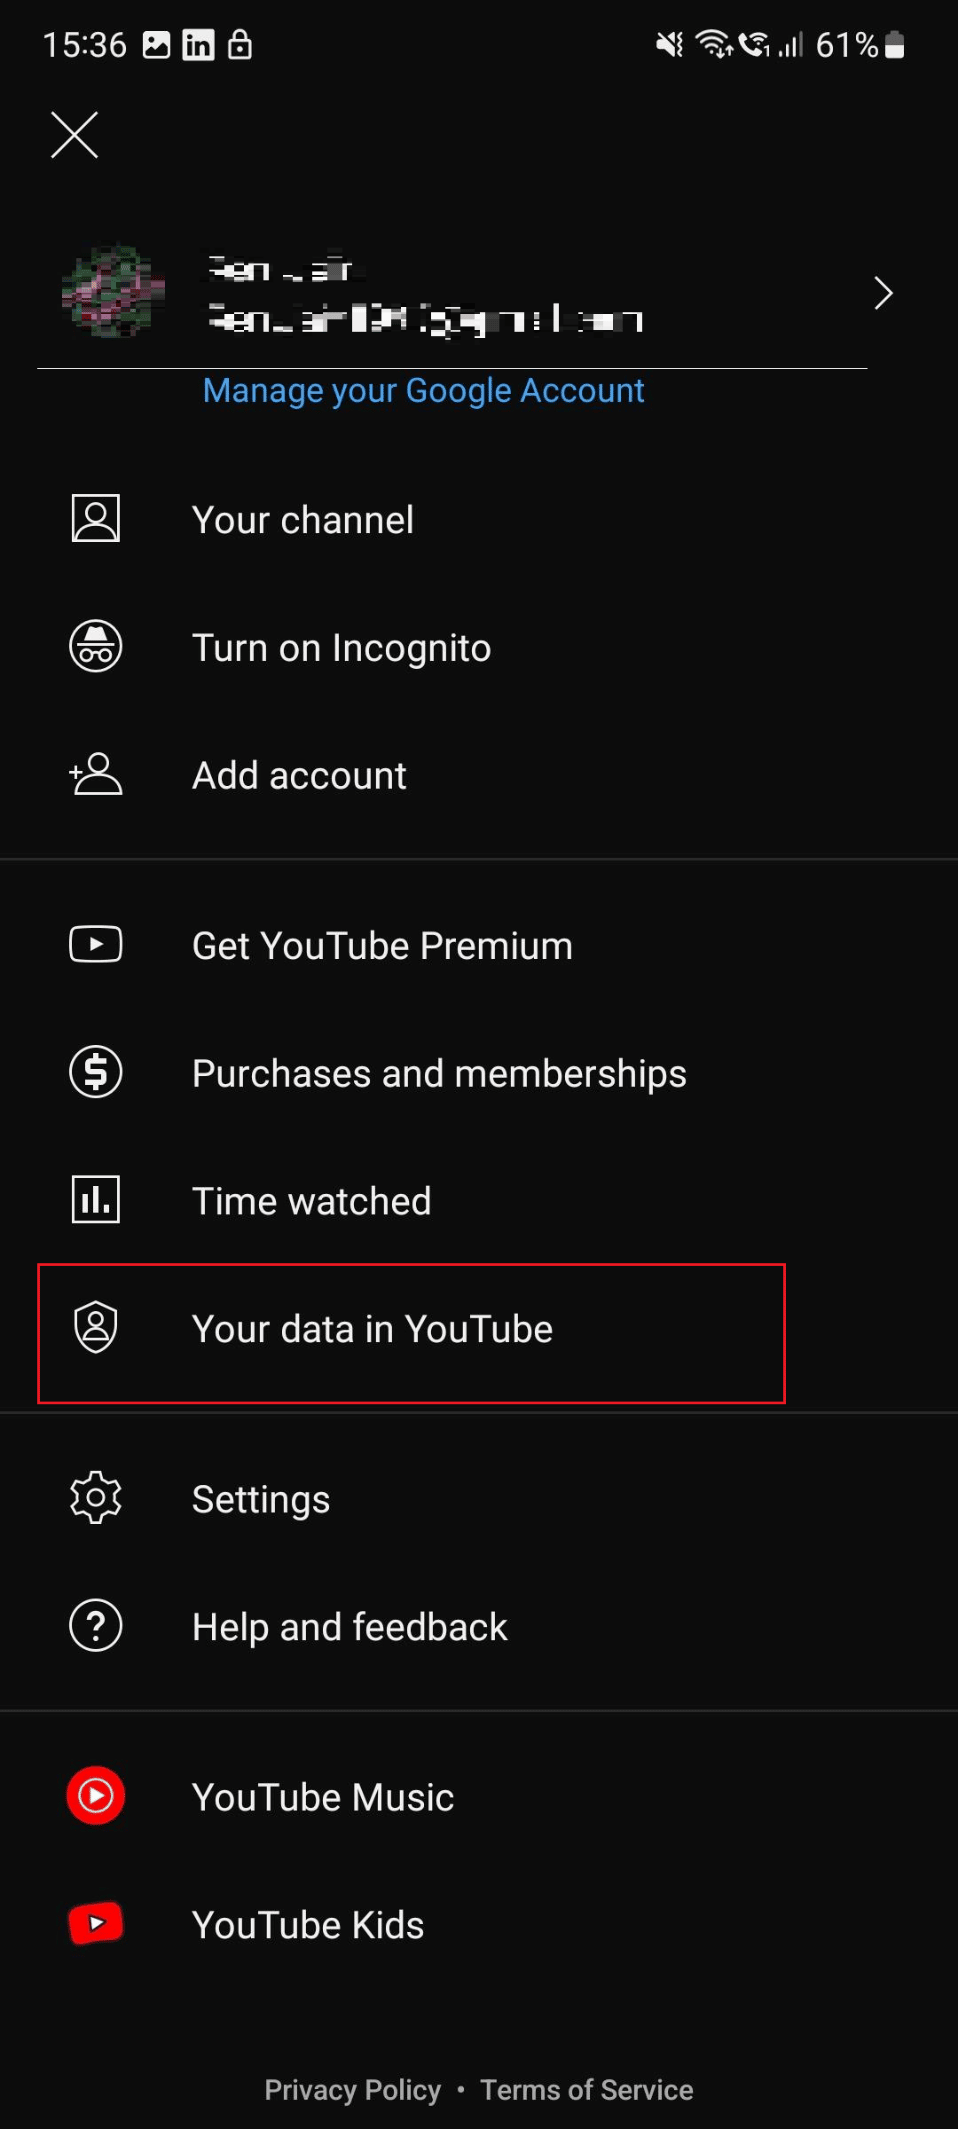 your data in youtube | How to View YouTube Comment History on Android